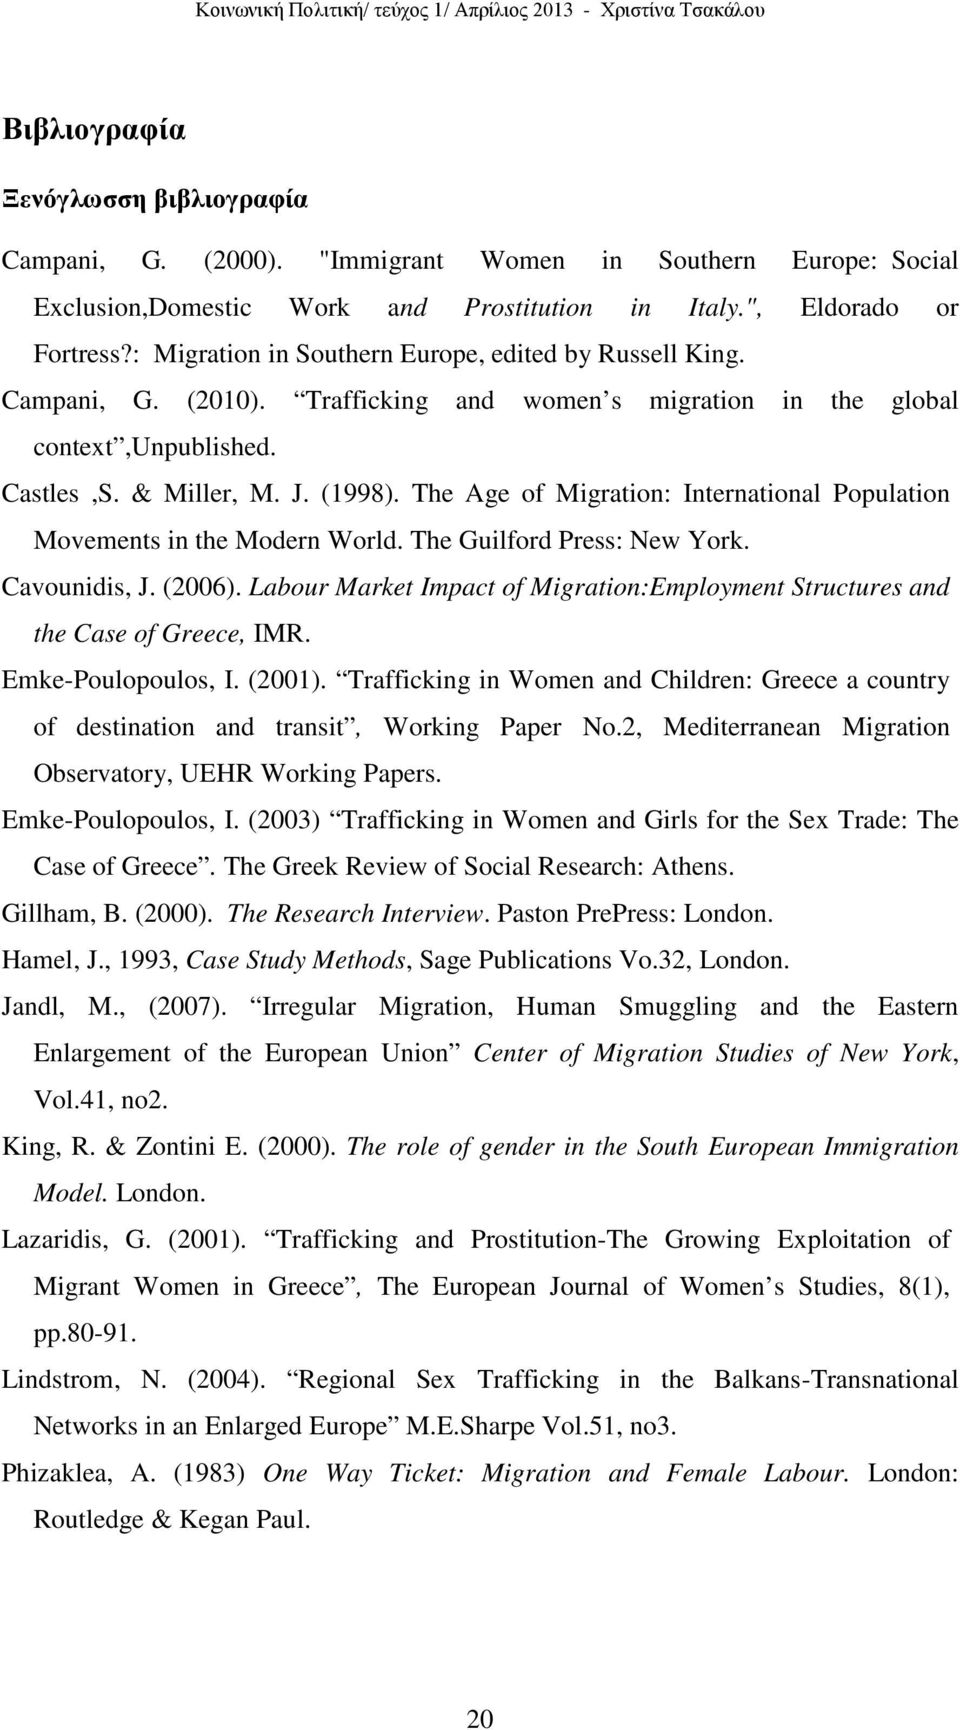 The Age of Migration: International Population Movements in the Modern World. The Guilford Press: New York. Cavounidis, J. (2006).